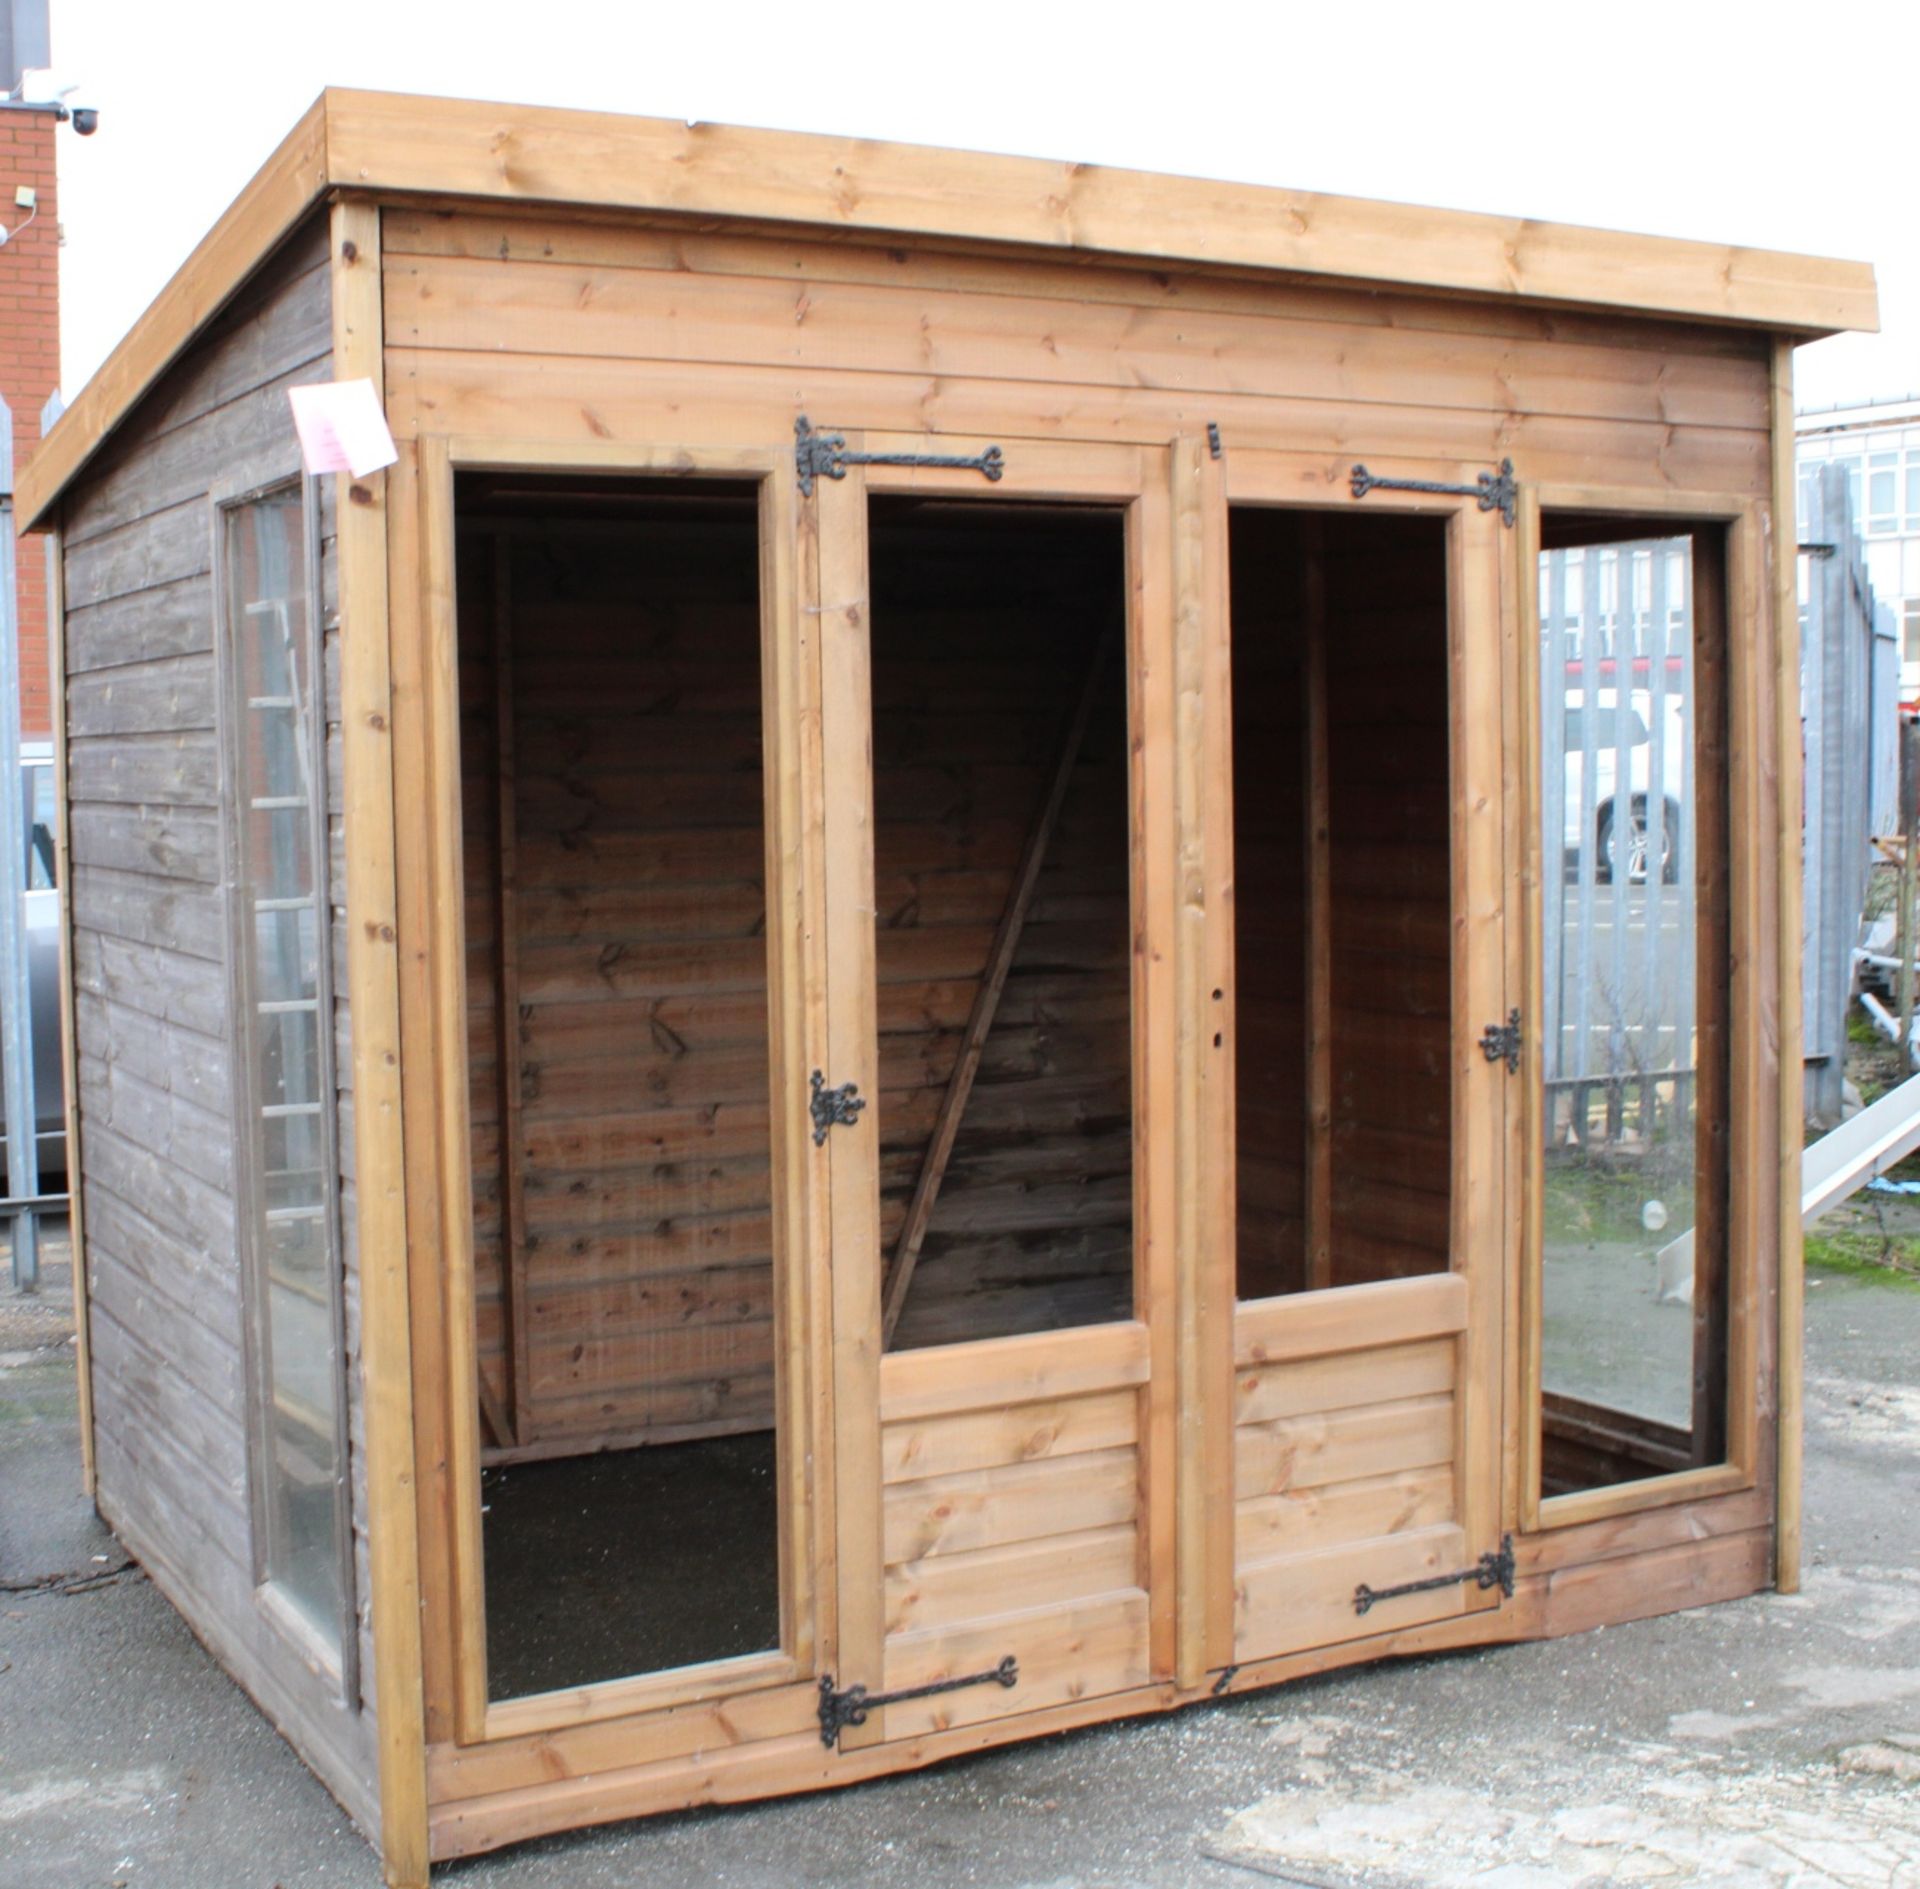 8x6 'clumber' summerhouse timber shed building, Standard 16mm Nominal Cladding RRP£ 2,640 - Image 2 of 4